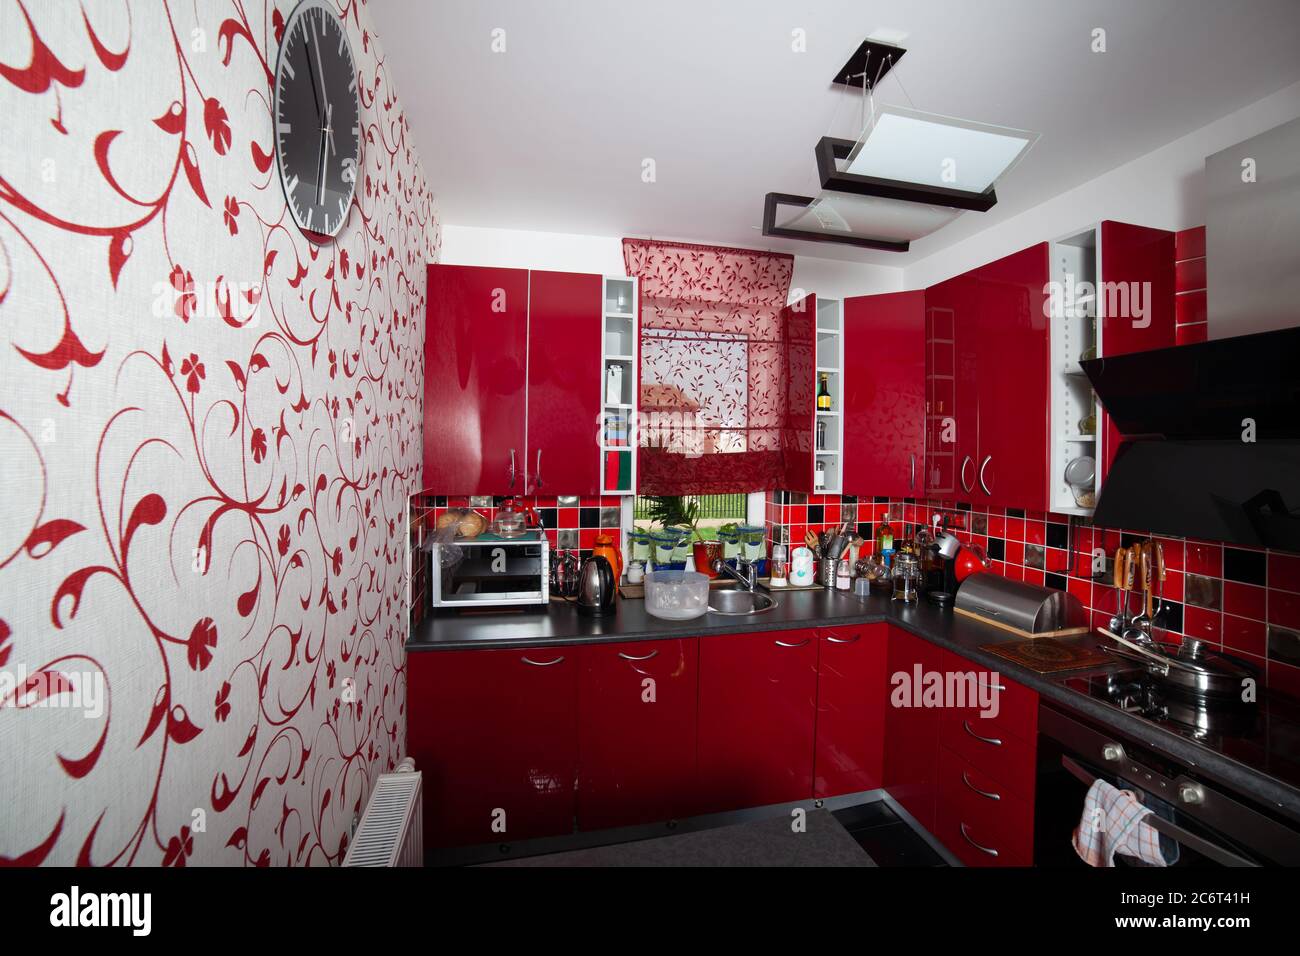 Home kitchen modern interior, fully equipped, contemporary design with floral pattern on wall and cherry red as dominant color. Stock Photo